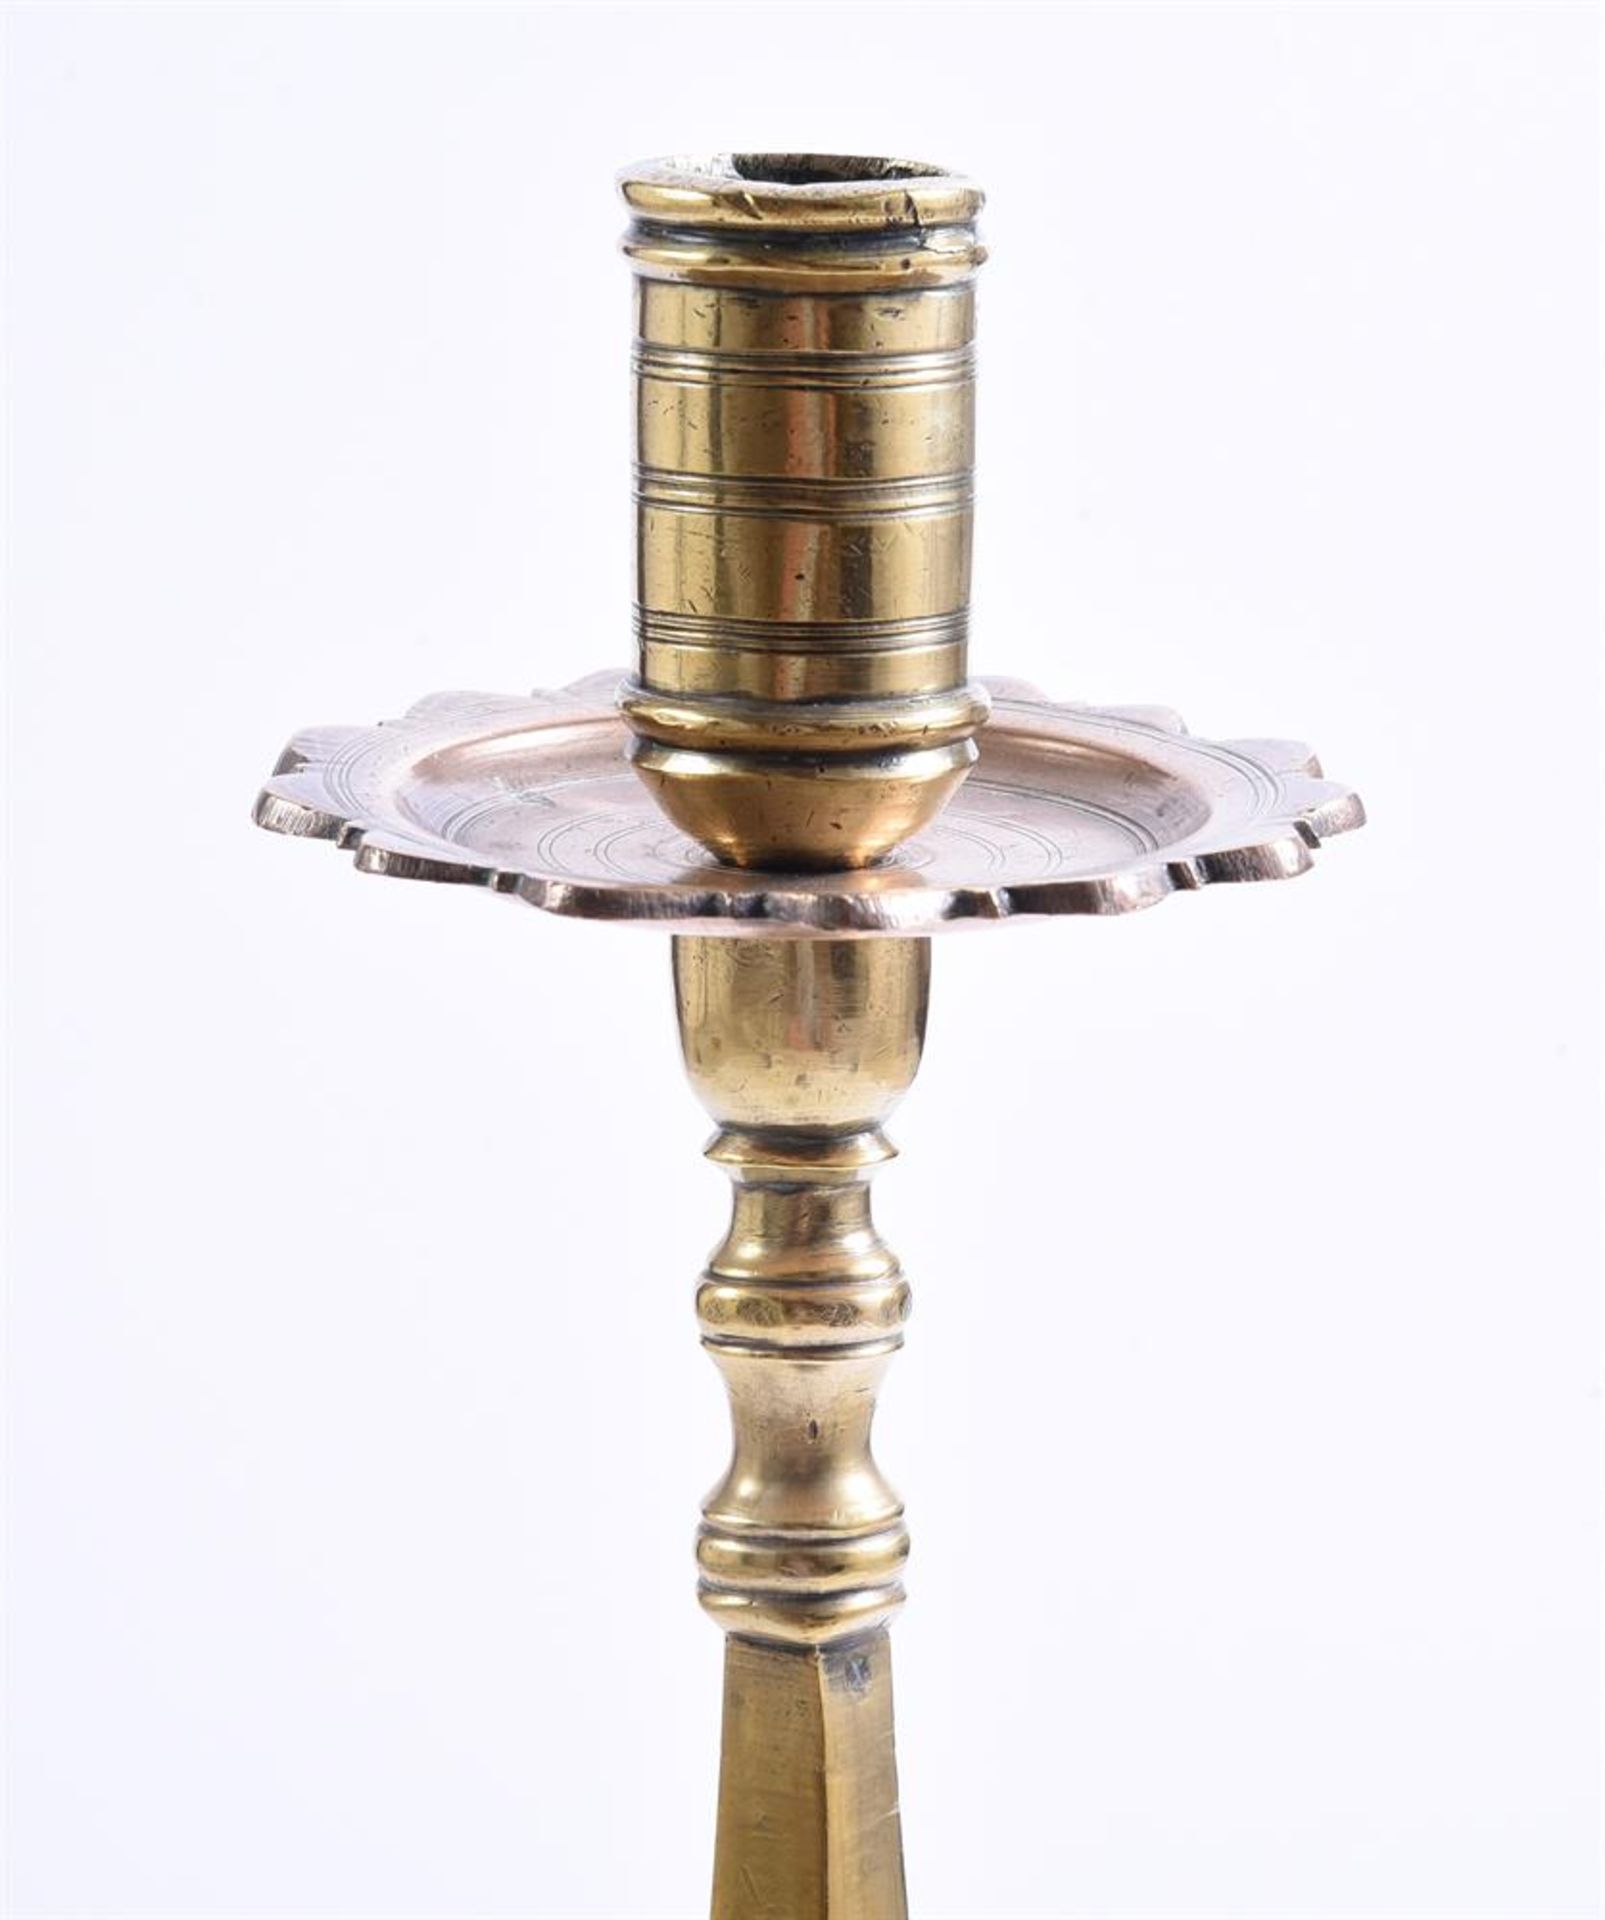 A LARGE BRASS CANDLESTICK, ENGLISH OR DUTCH, 18TH CENTURY - Image 2 of 4